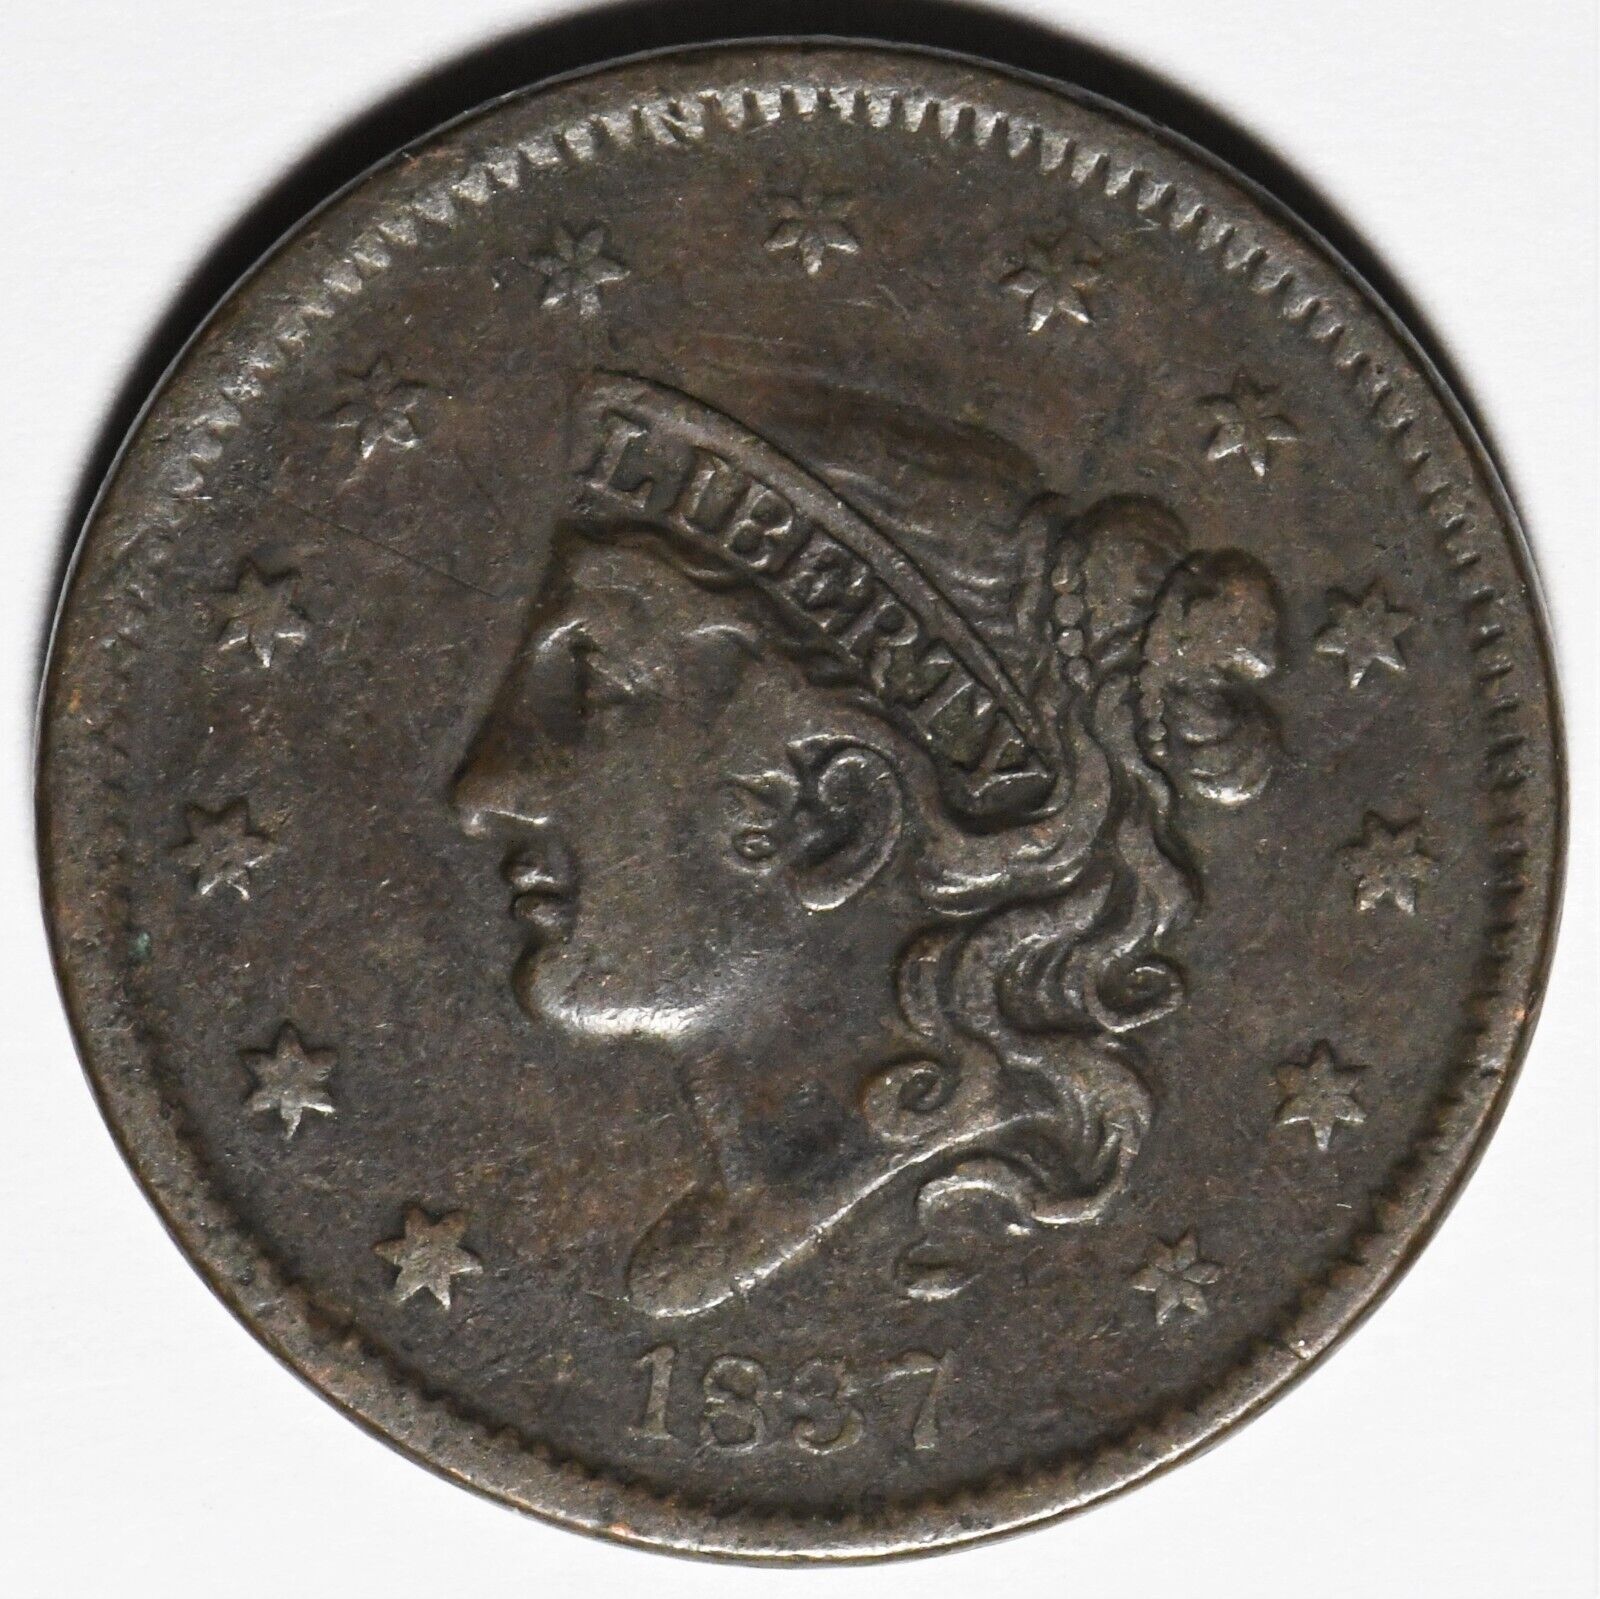 1837 Coronet Head Large Cent With A Strong Strike And Details